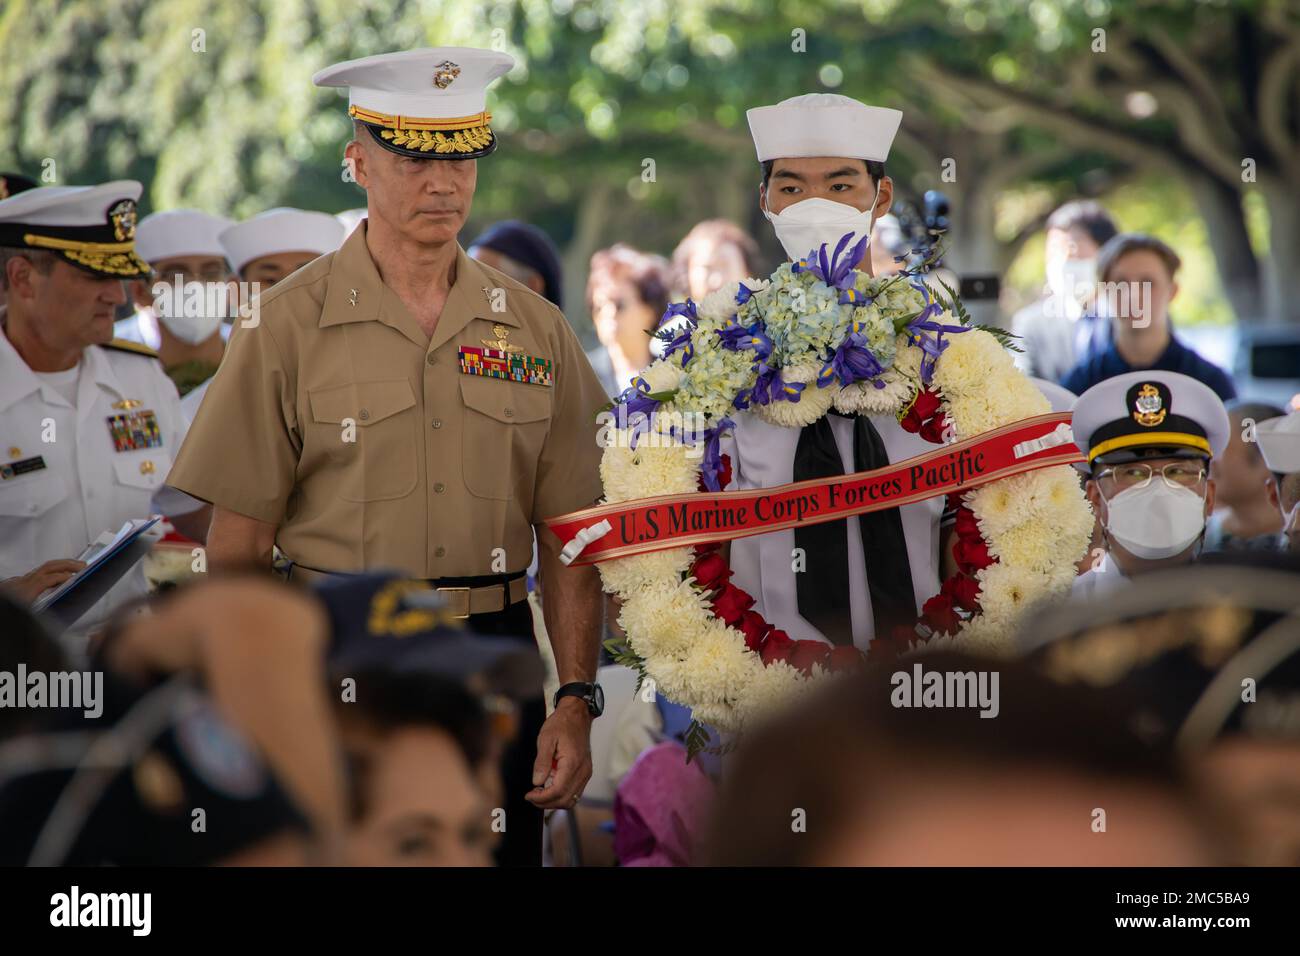 U.S. Marine Corps Maj. Gen. Mark Hashimoto, executive director, U.S. Marine Corps Forces, Pacific, lays a wreath during the 72nd Korean War Anniversary at the National Memorial Cemetery of the Pacific (Punchbowl) in Honolulu, Hawaii, June 25, 2022. The Korean War began on June 25, 1950, when North Korean armed forces invaded South Korea. The attack took place at several strategic points along the 38th parallel, the line dividing the communist Democratic People’s Republic of Korea from the Republic of Korea in the south. This event honors the lives lost and the sacrifices made during the war. Stock Photo